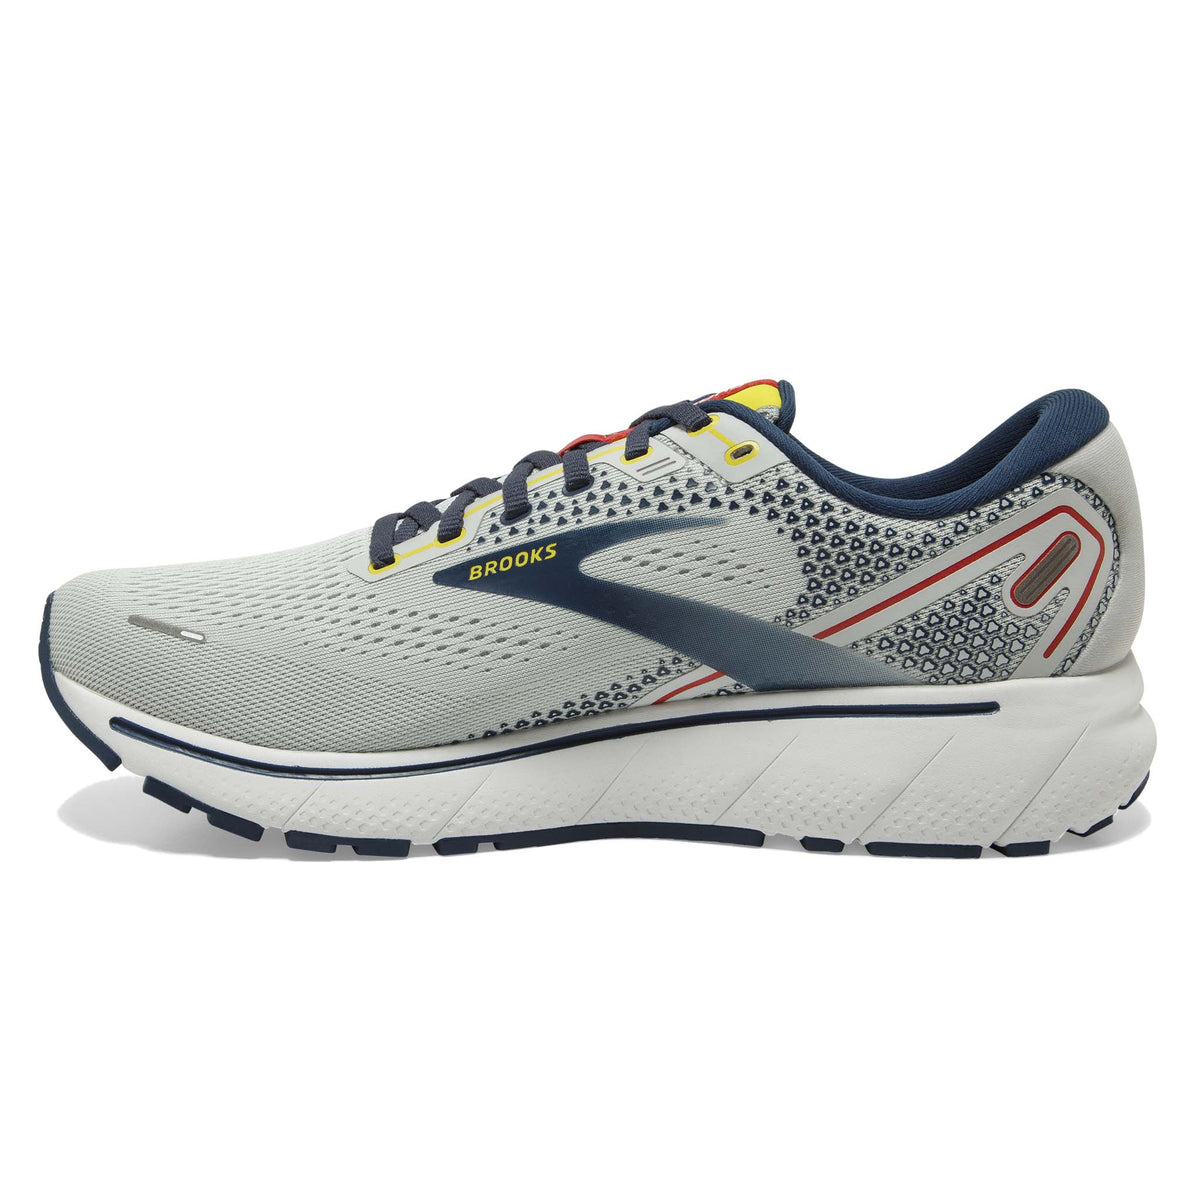 Homme Chaussures de course & Tennis, Homme Runners